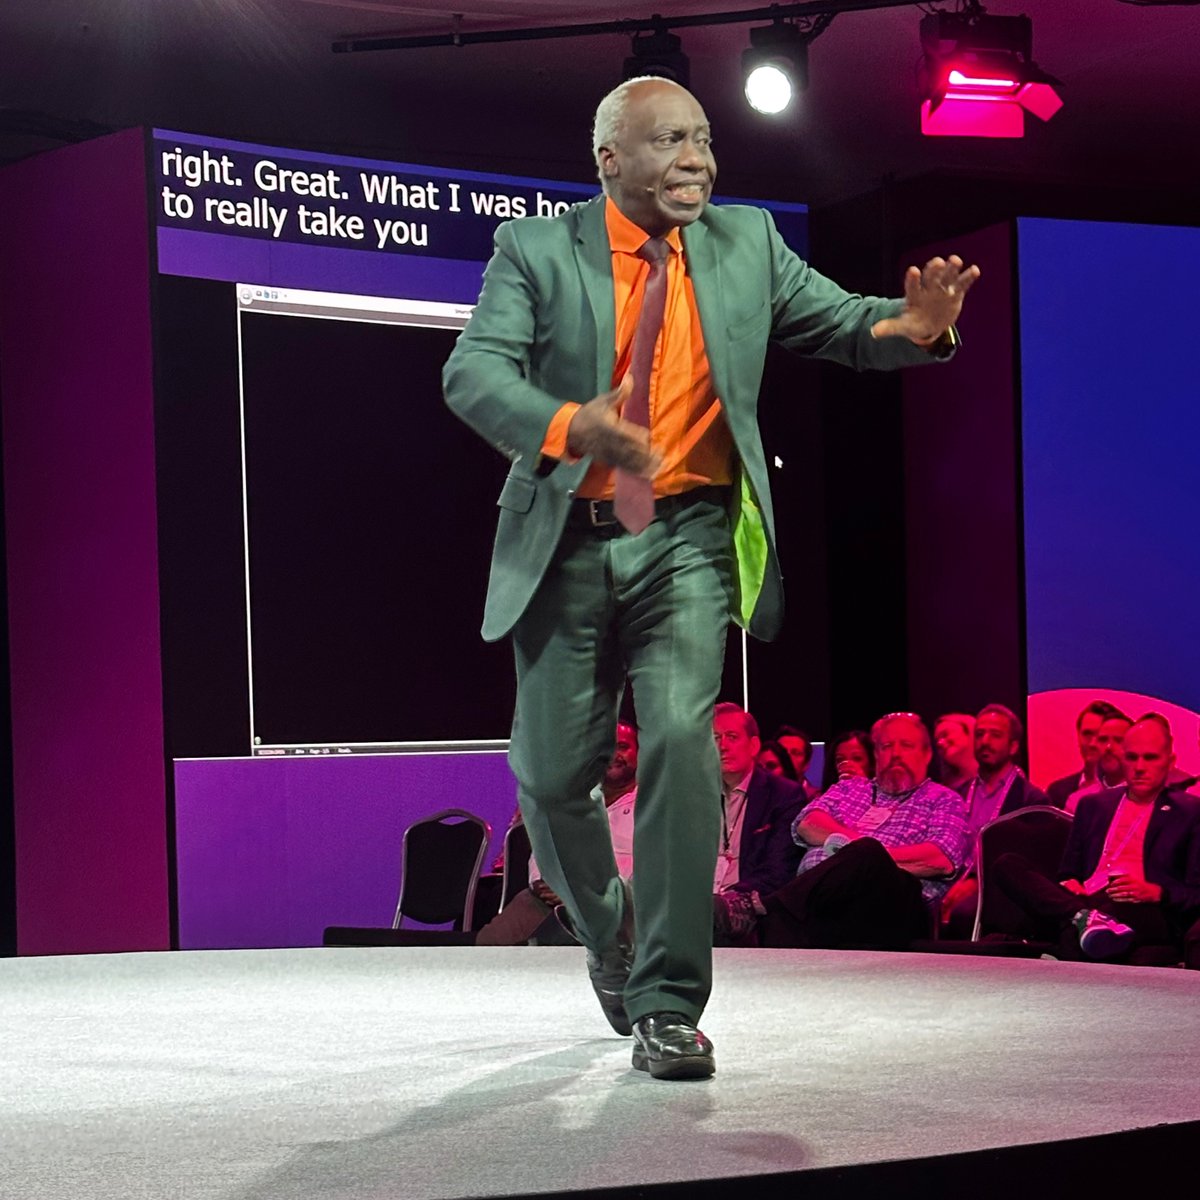 'Your brain confuses change with danger. You can't go around telling people how new and cool things are...saying those words will shut down their brains.' @EddieObeng talking change management and the folly of straying from the future familiar.

#smartsheetENGAGE @smartsheet